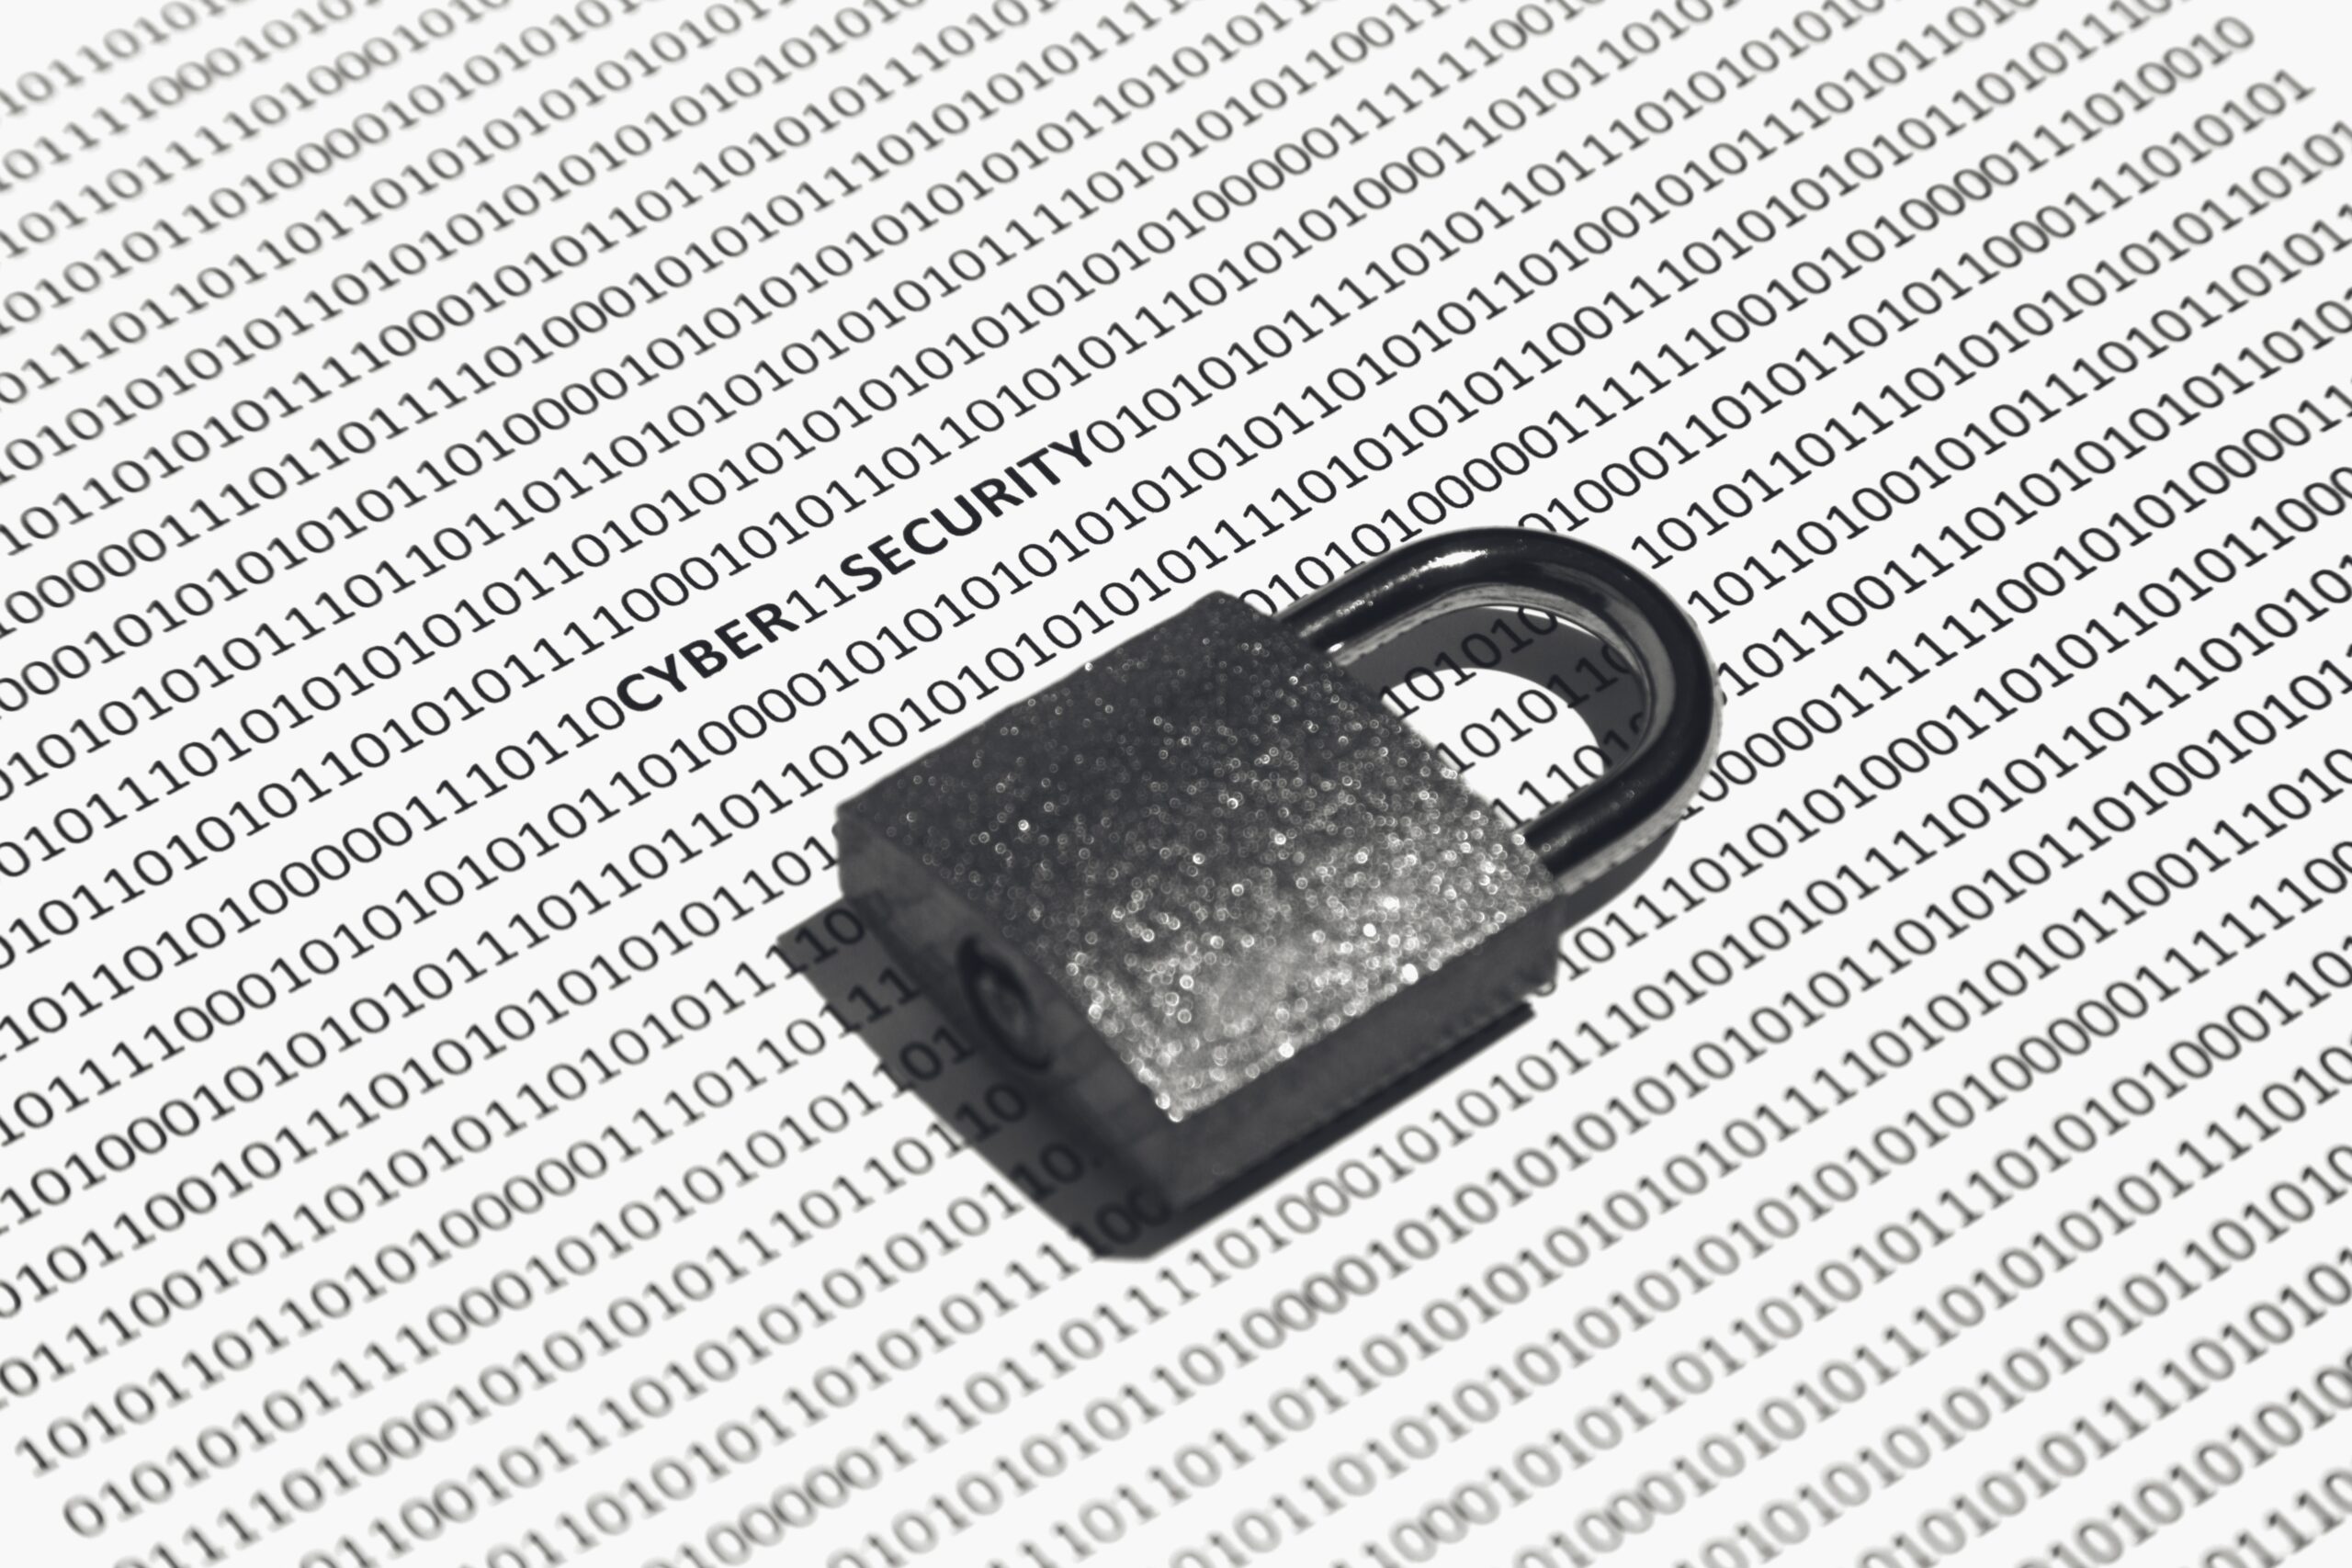 Closeup shot of a lock on a white surface with cyber security, ones, and zeros written on it